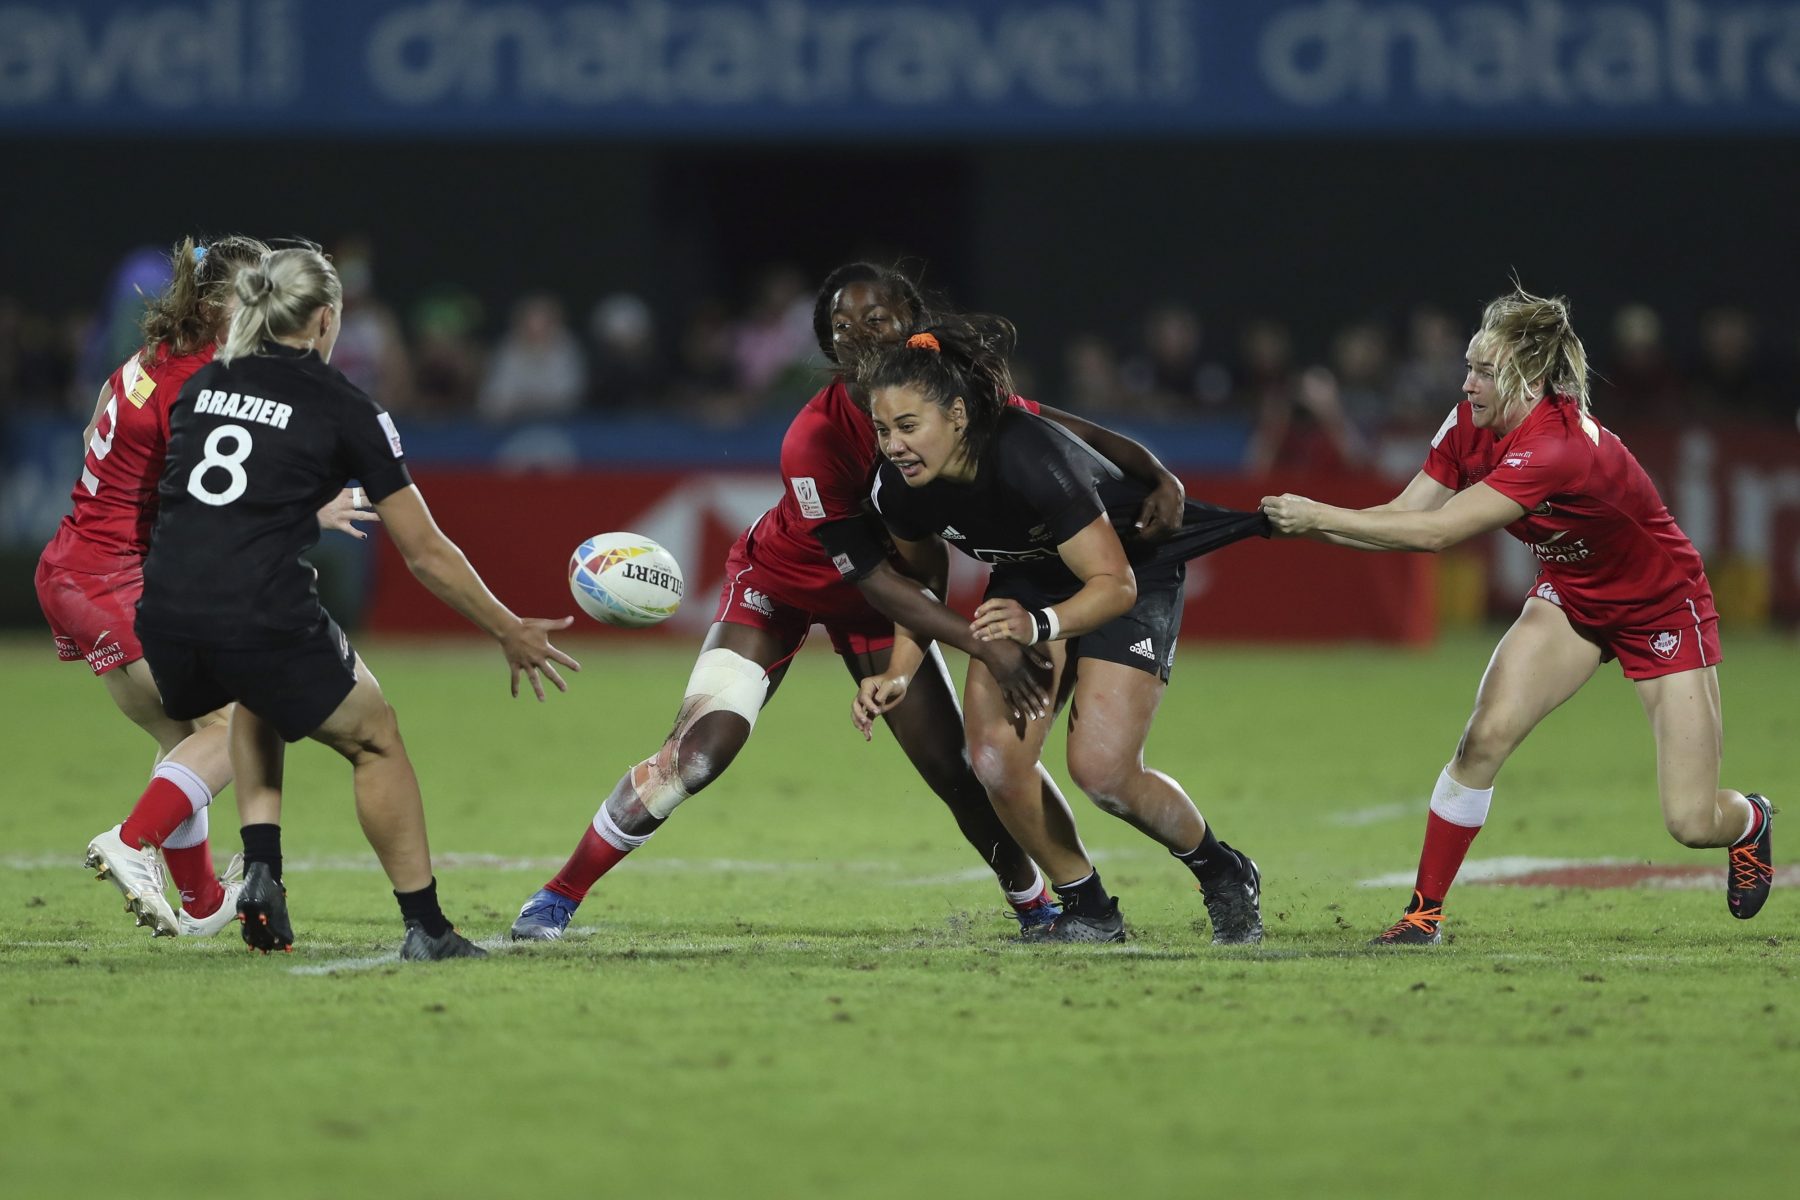 New Zealand's Shakira Baker passes the ball in the final match against Canada at the Emirates Airline Rugby Sevens in Dubai, United Arab Emirates, Saturday, Dec.7, 2019. (AP Photo/Kamran Jebreili)